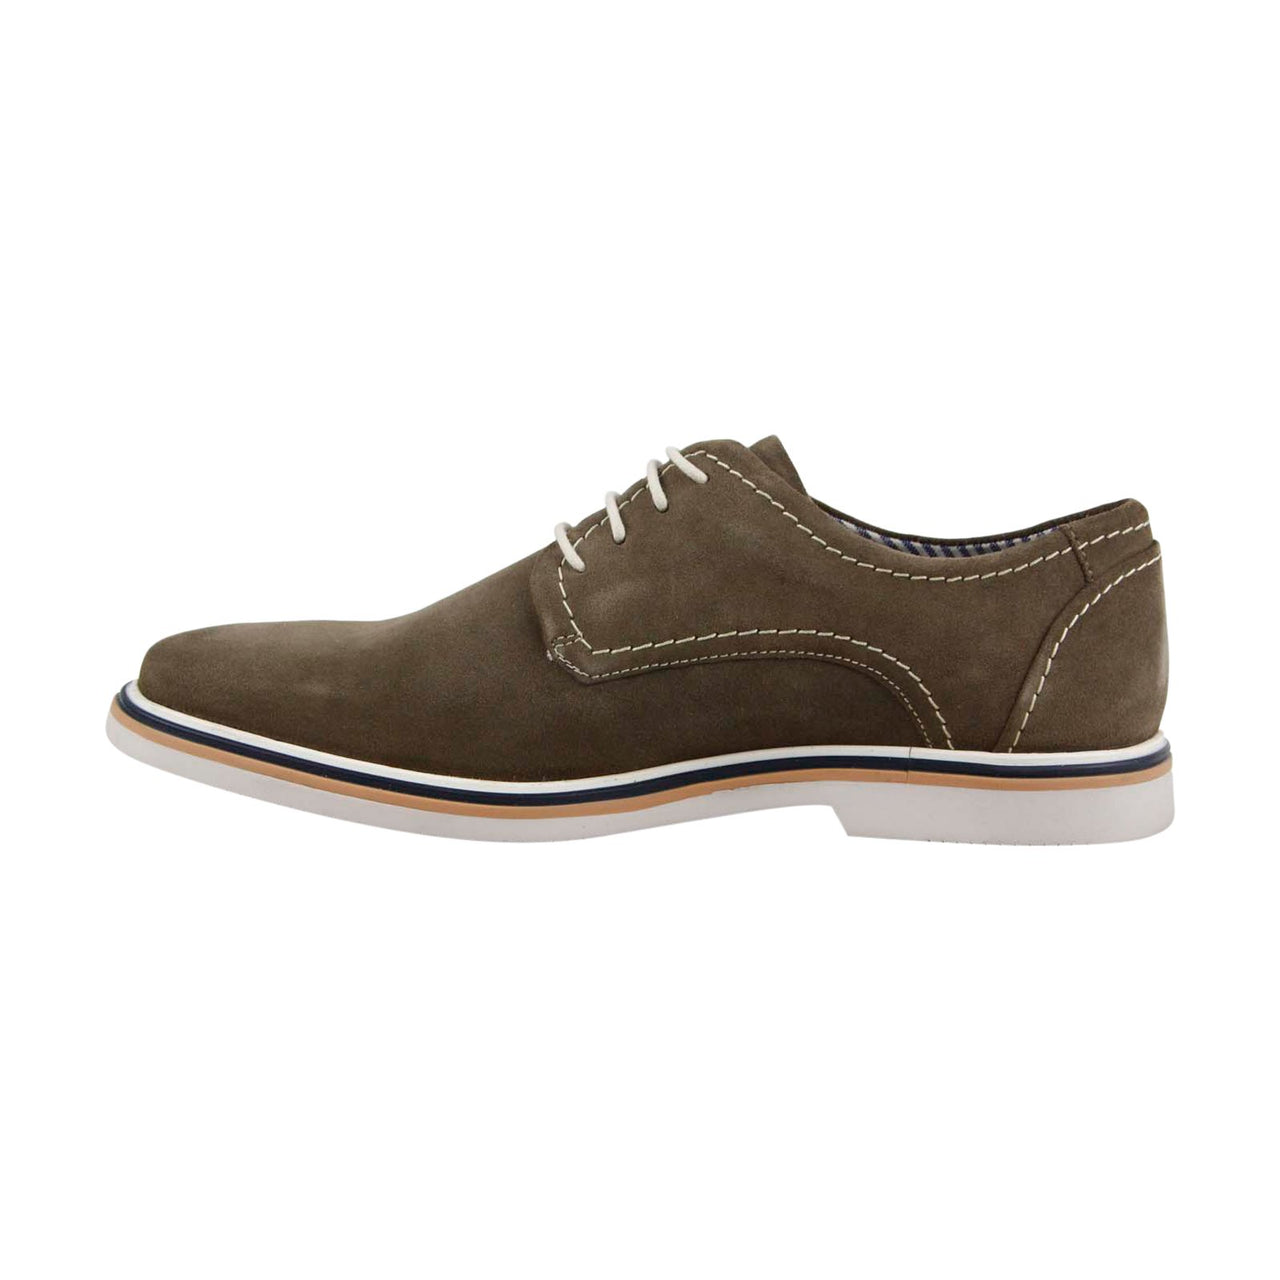 Steve Madden Frick Mens Brown Suede Lace Up Plain Toe Oxfords Shoes ...